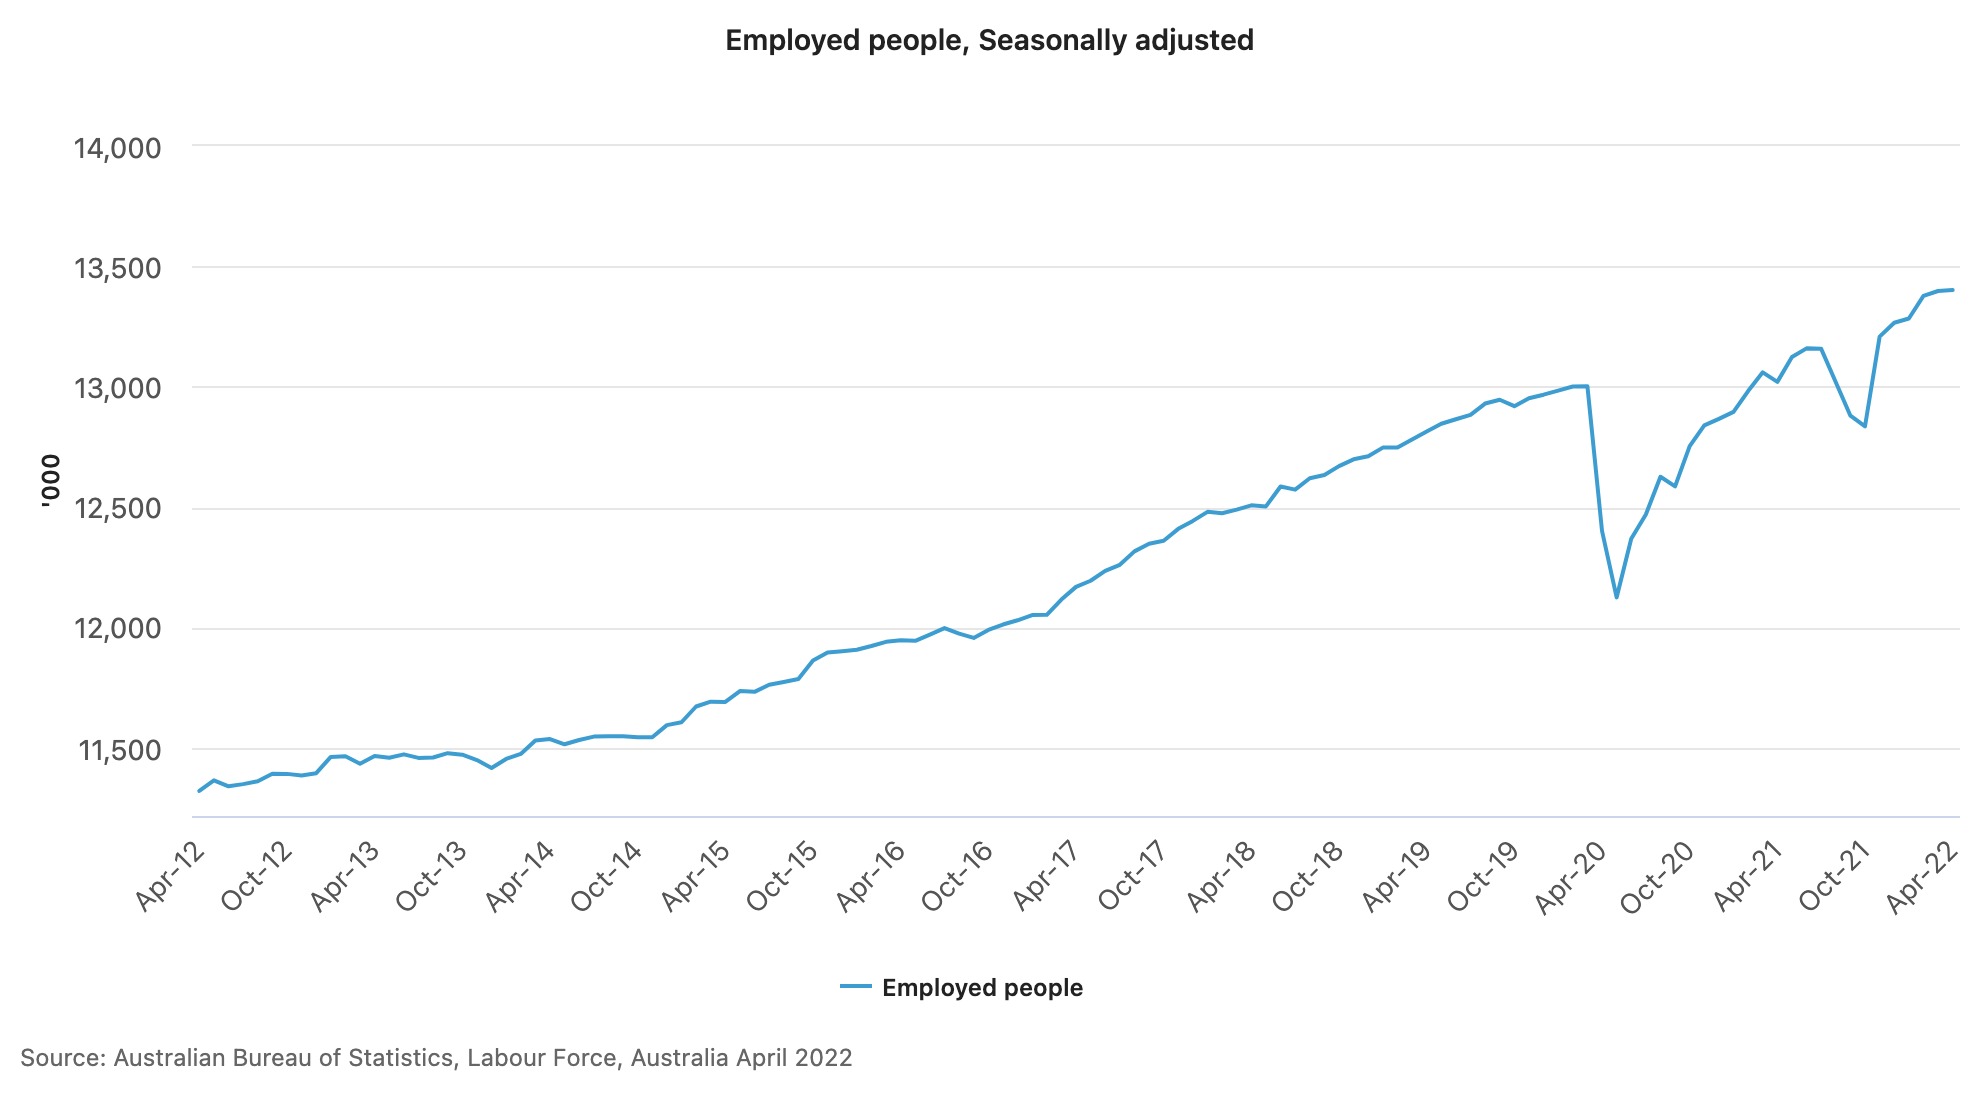 Australian employed people, per the ABS